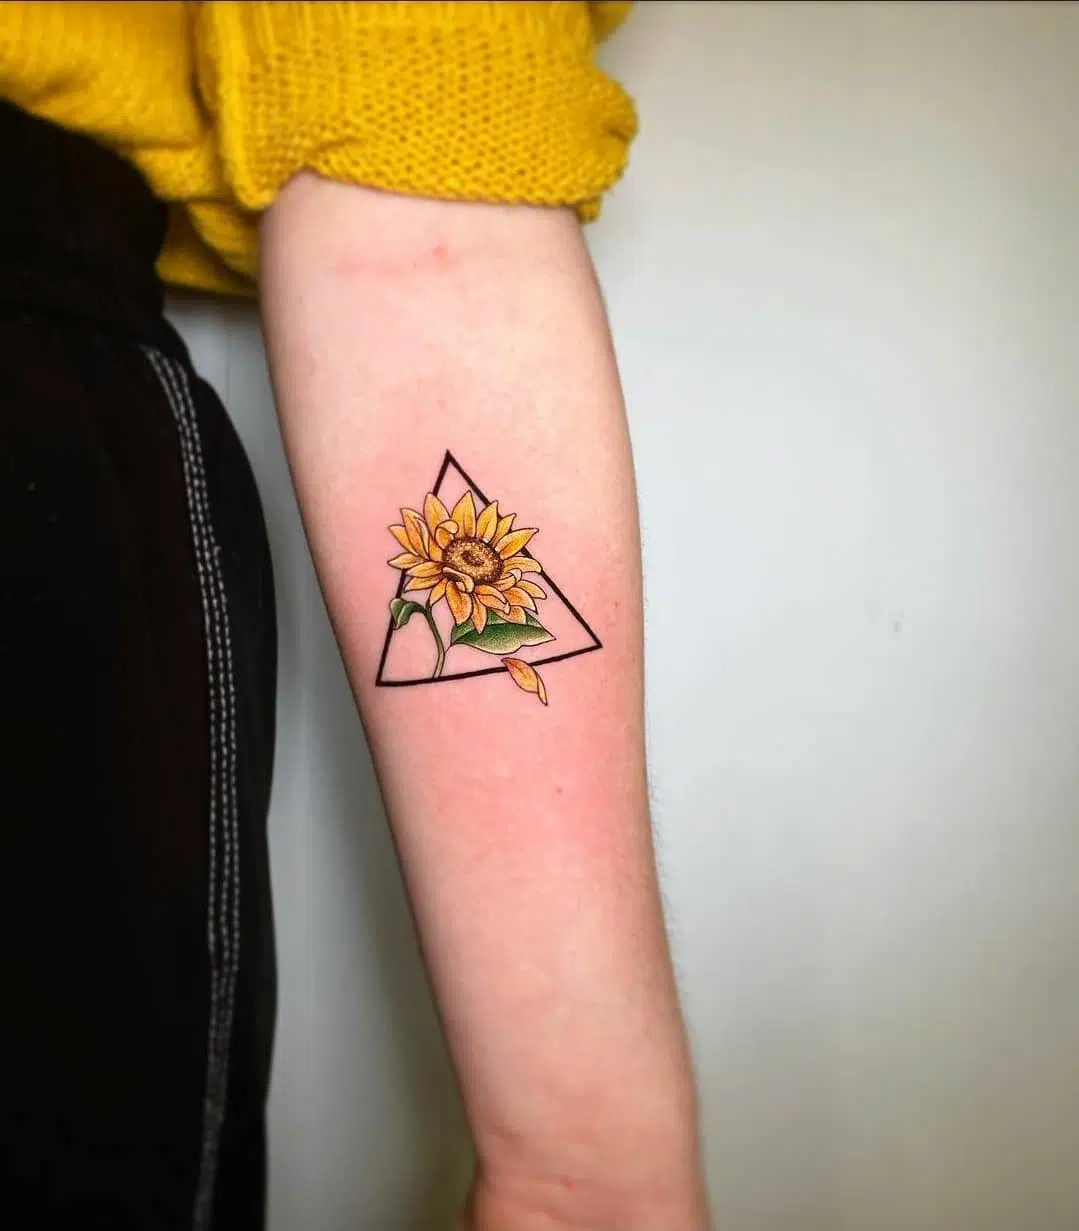 Fresh Sunflower in a triangle by Noemi for Eva! Thanks so much for coming!
noemi_tattoo                        